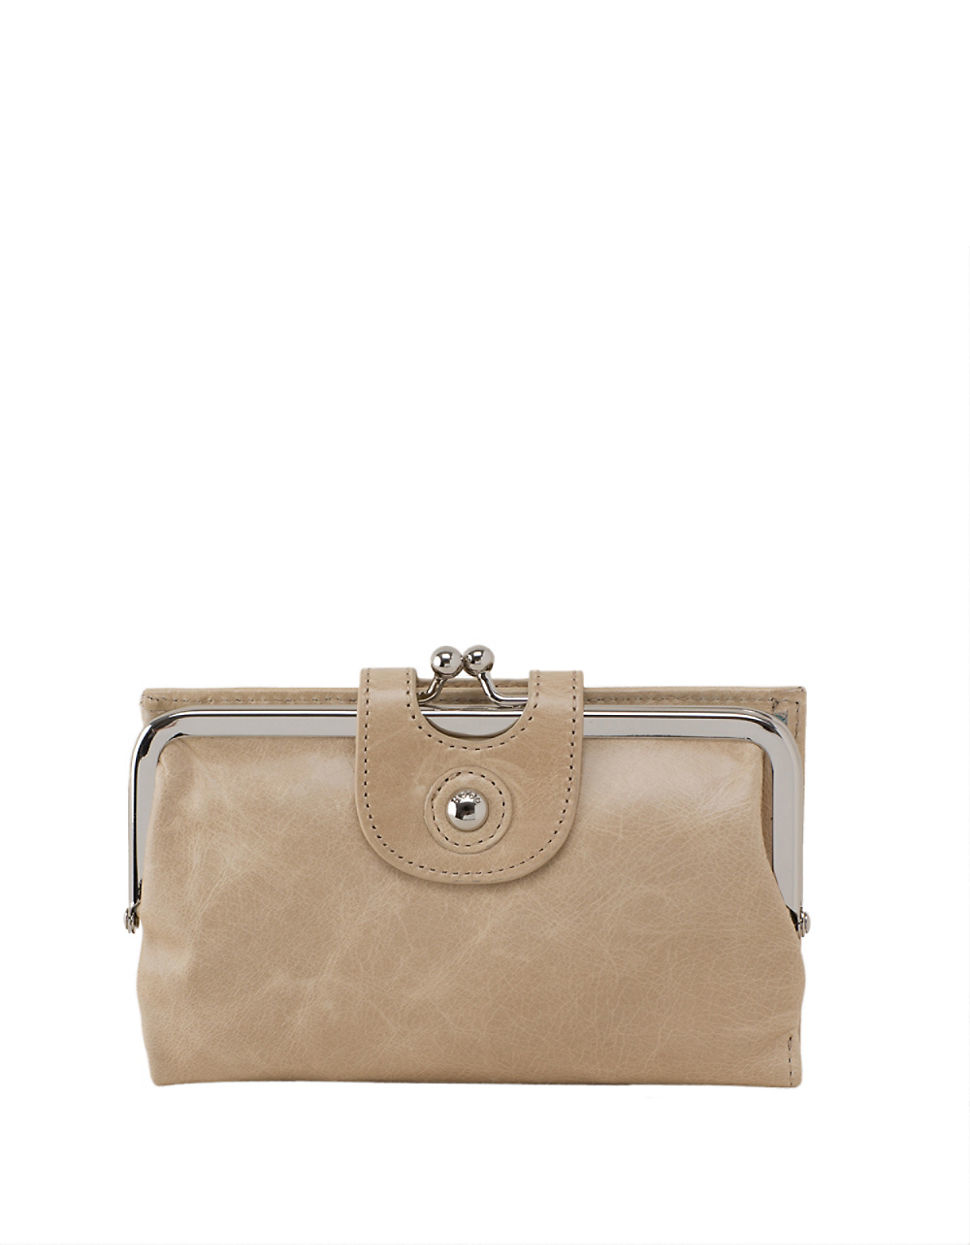 Lyst - Hobo Alice Leather Wallet in Natural